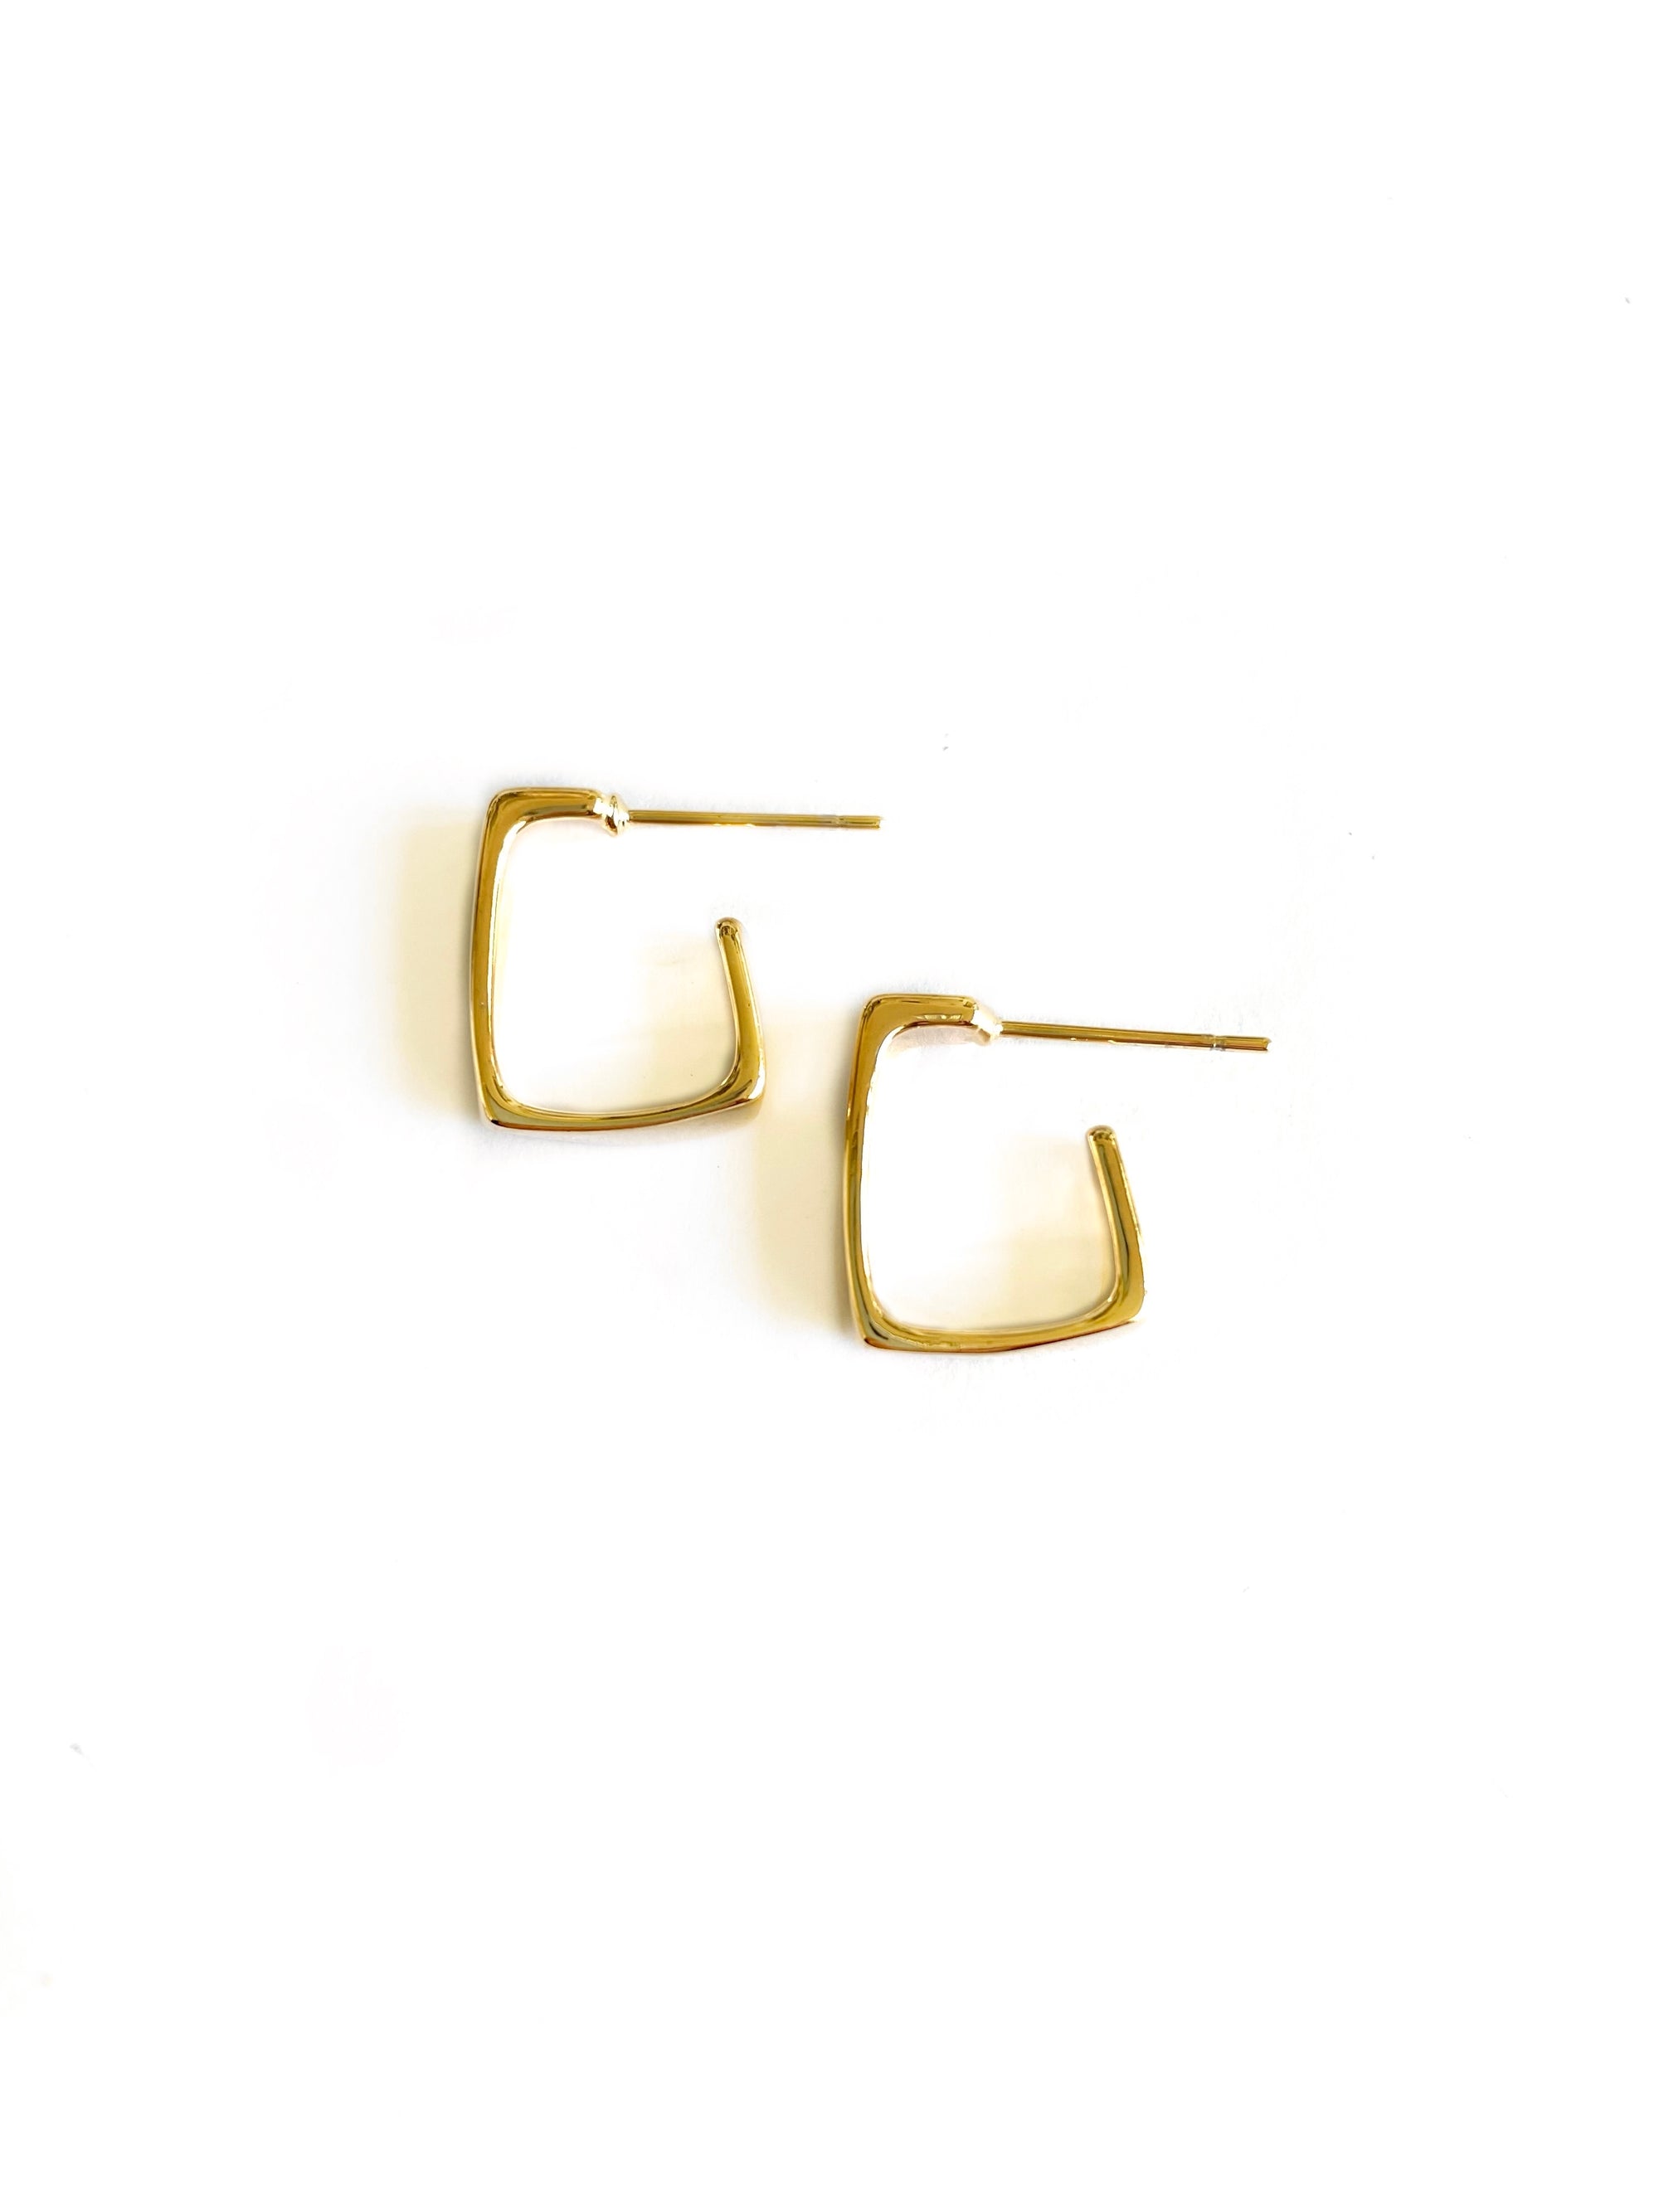 sophisticated small and dainty half open square shaped hoop earrings in a gold finish over italian brass